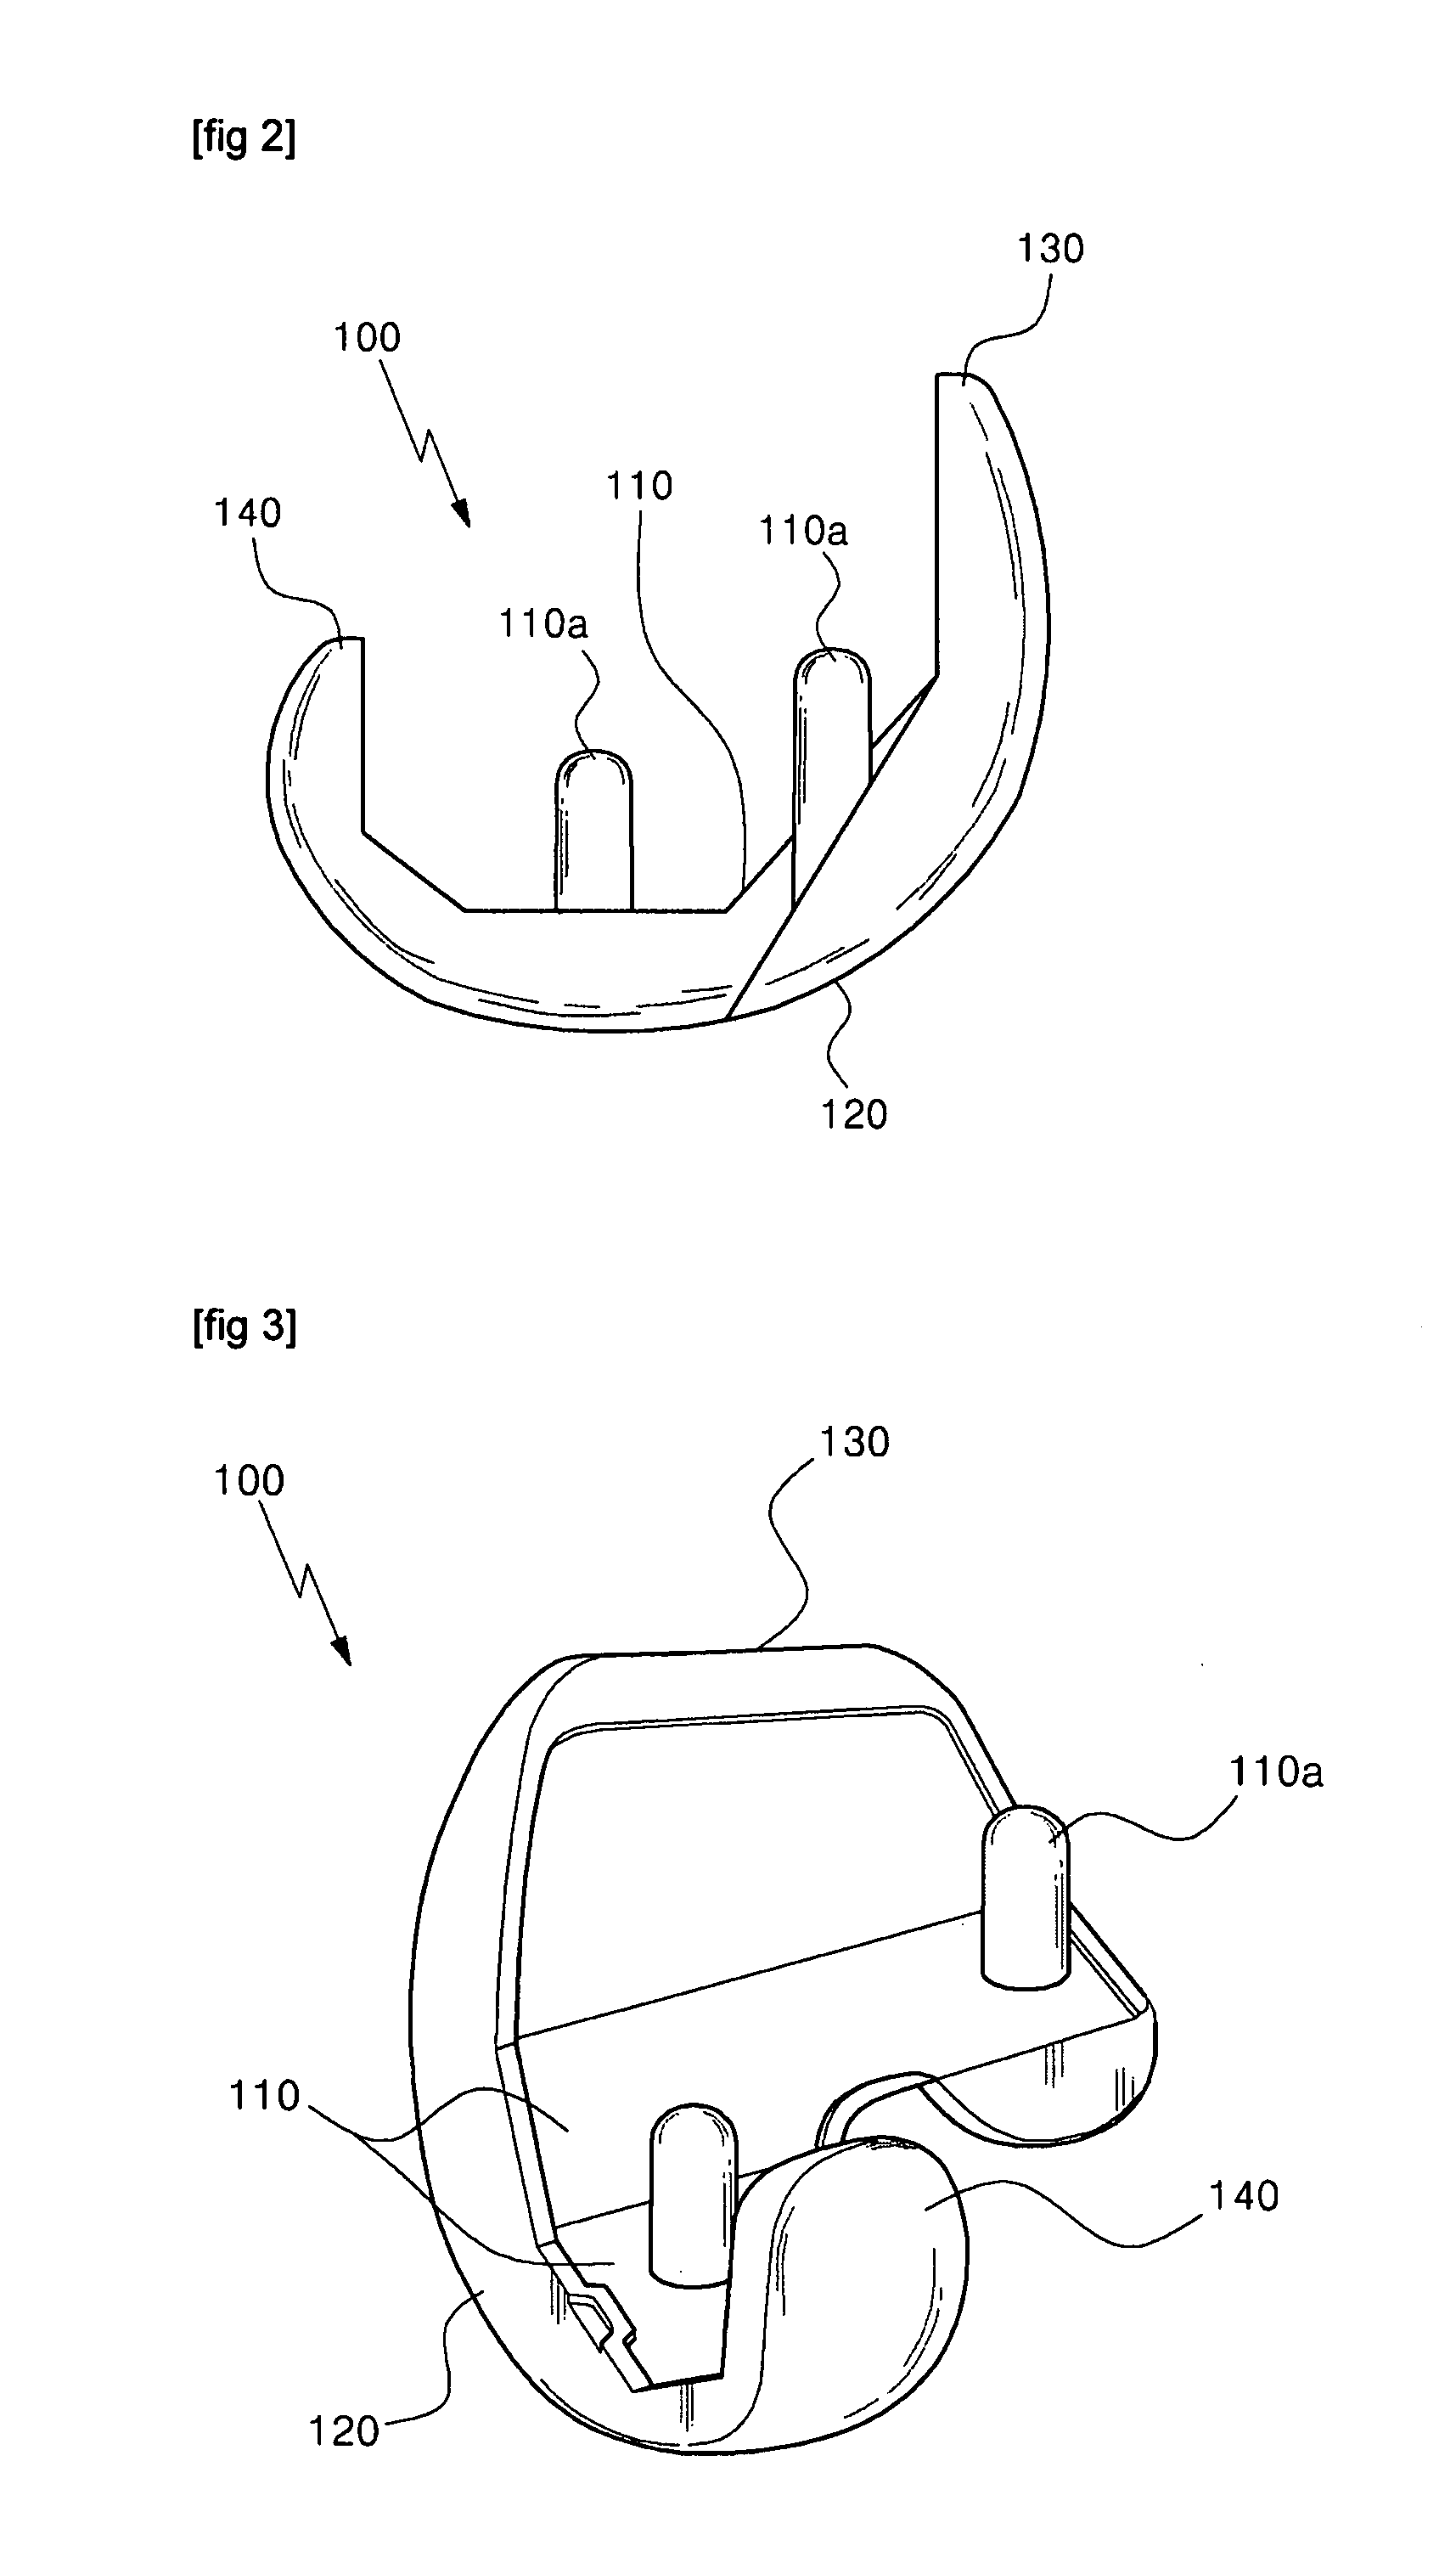 Knee joint prosthesis for bi-compartmental knee replacement and surgical devices thereof